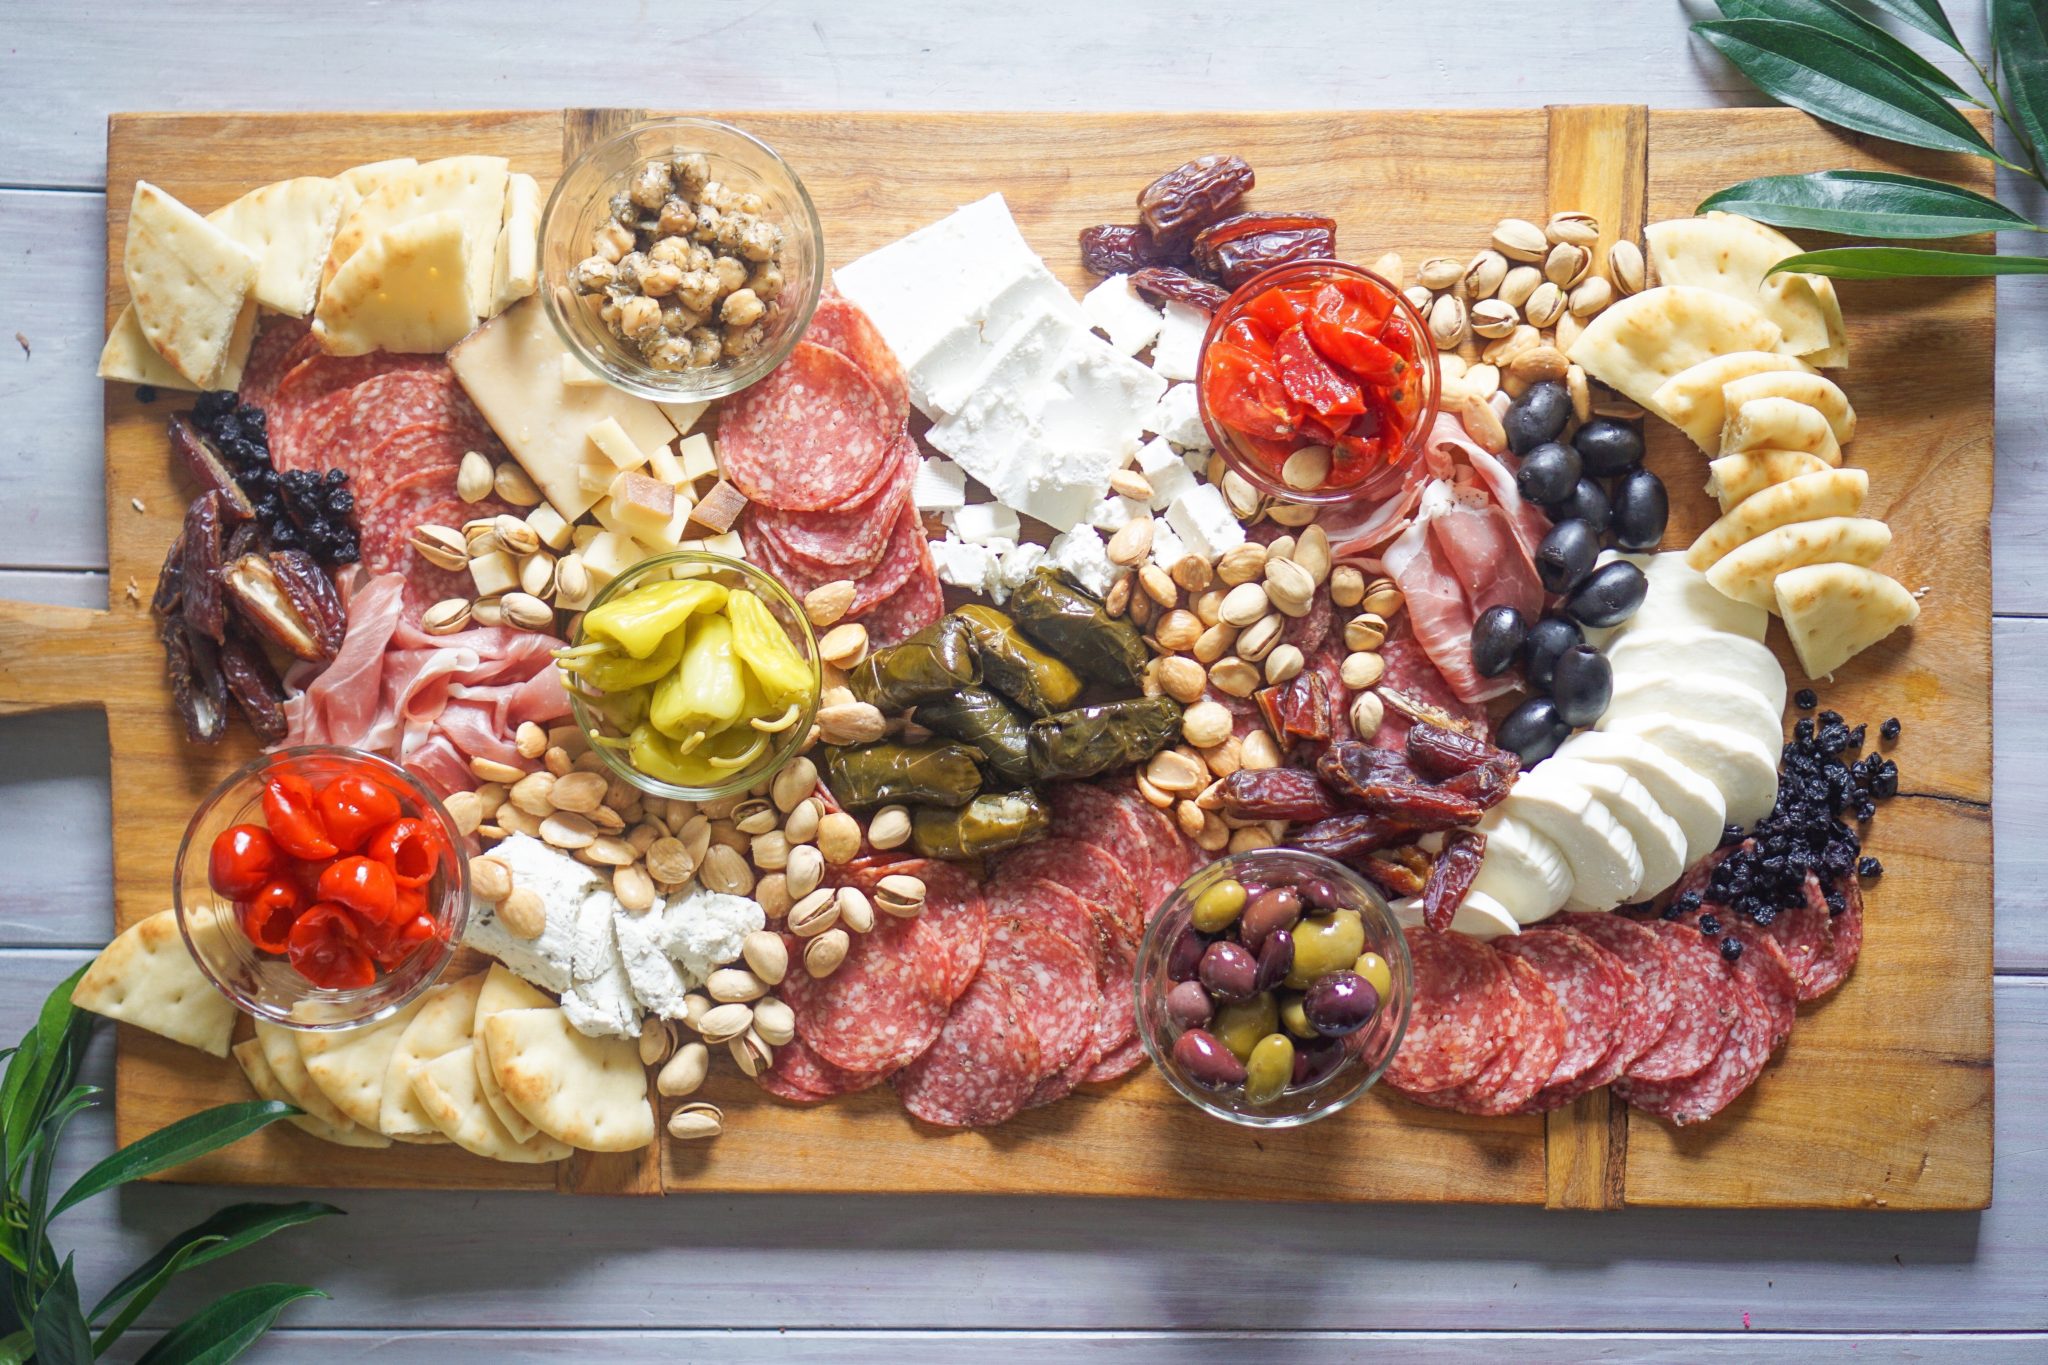 No one does charcuterie boards like Italians